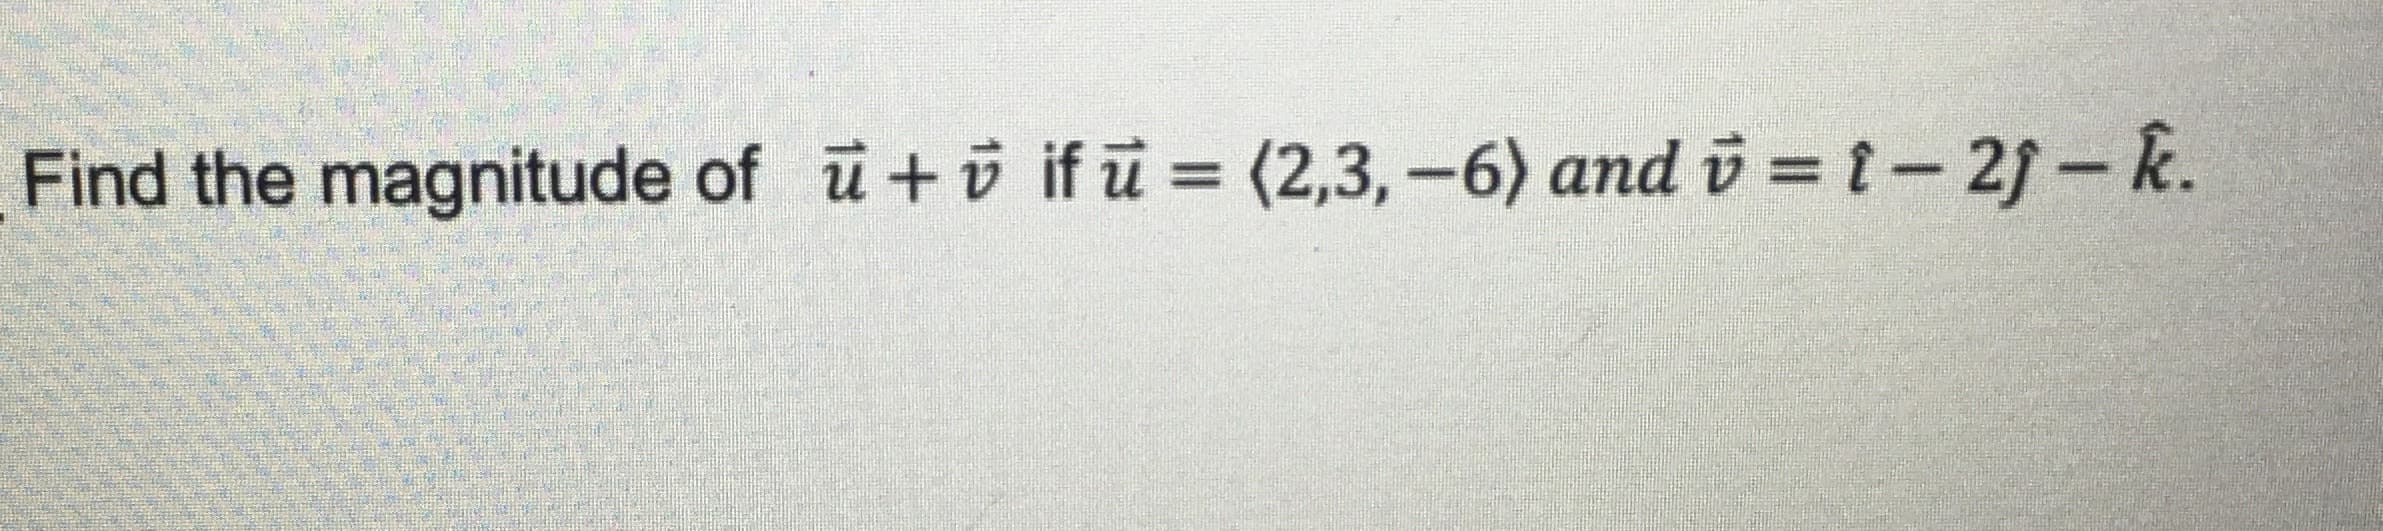 Find the magnitude of u+o if ū = (2,3,-6) and v = t- 21- k.
.
